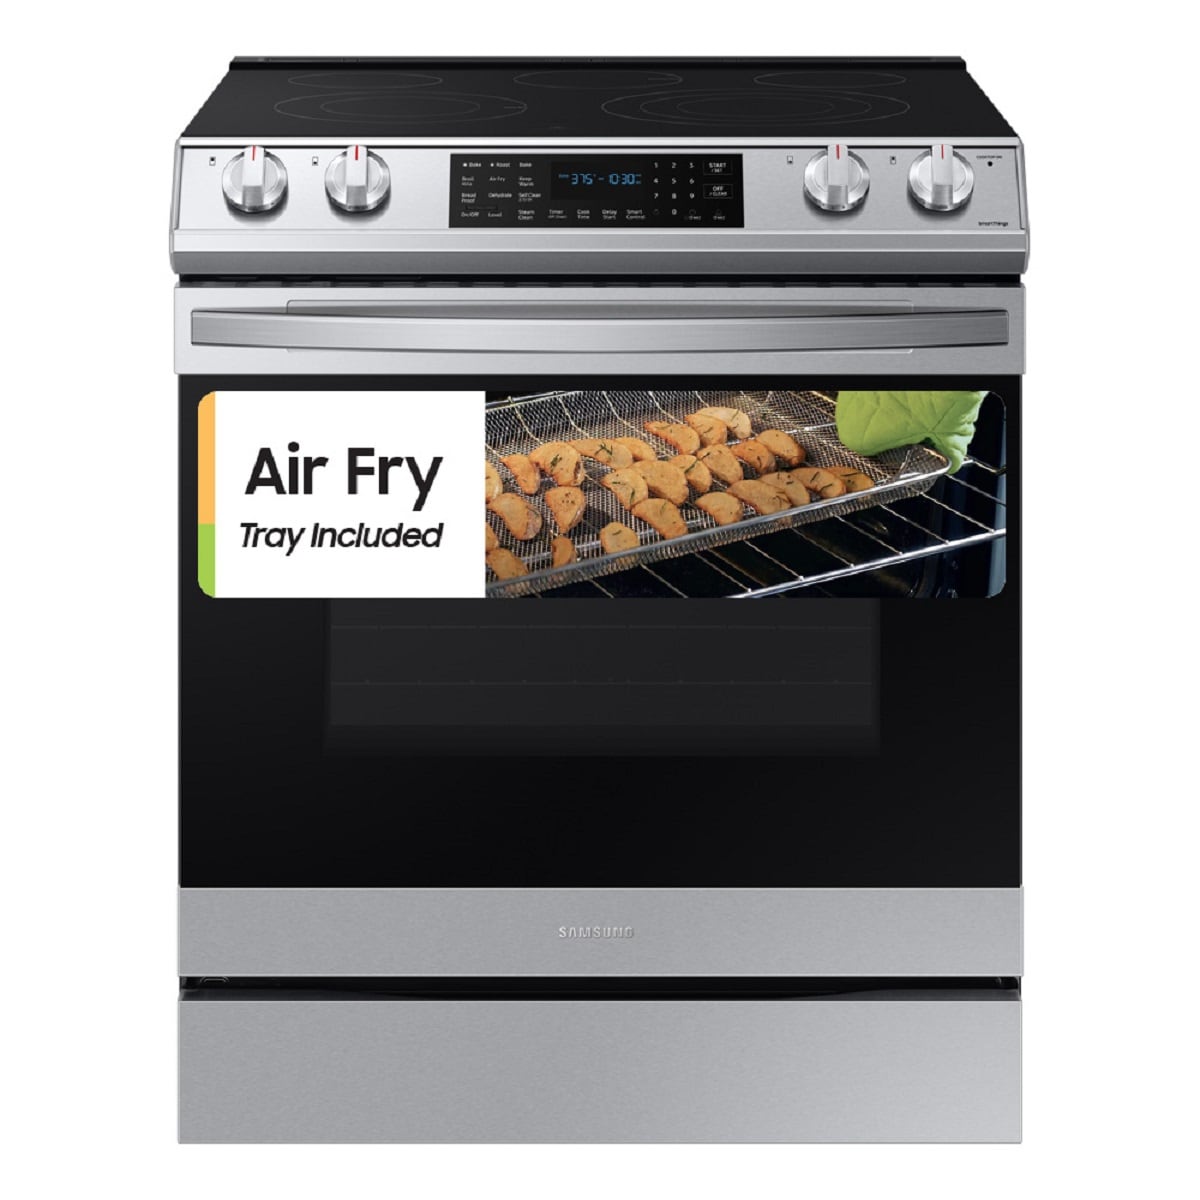 Frigidaire Gallery 30-in Gas and Electric Range Air Fry Tray